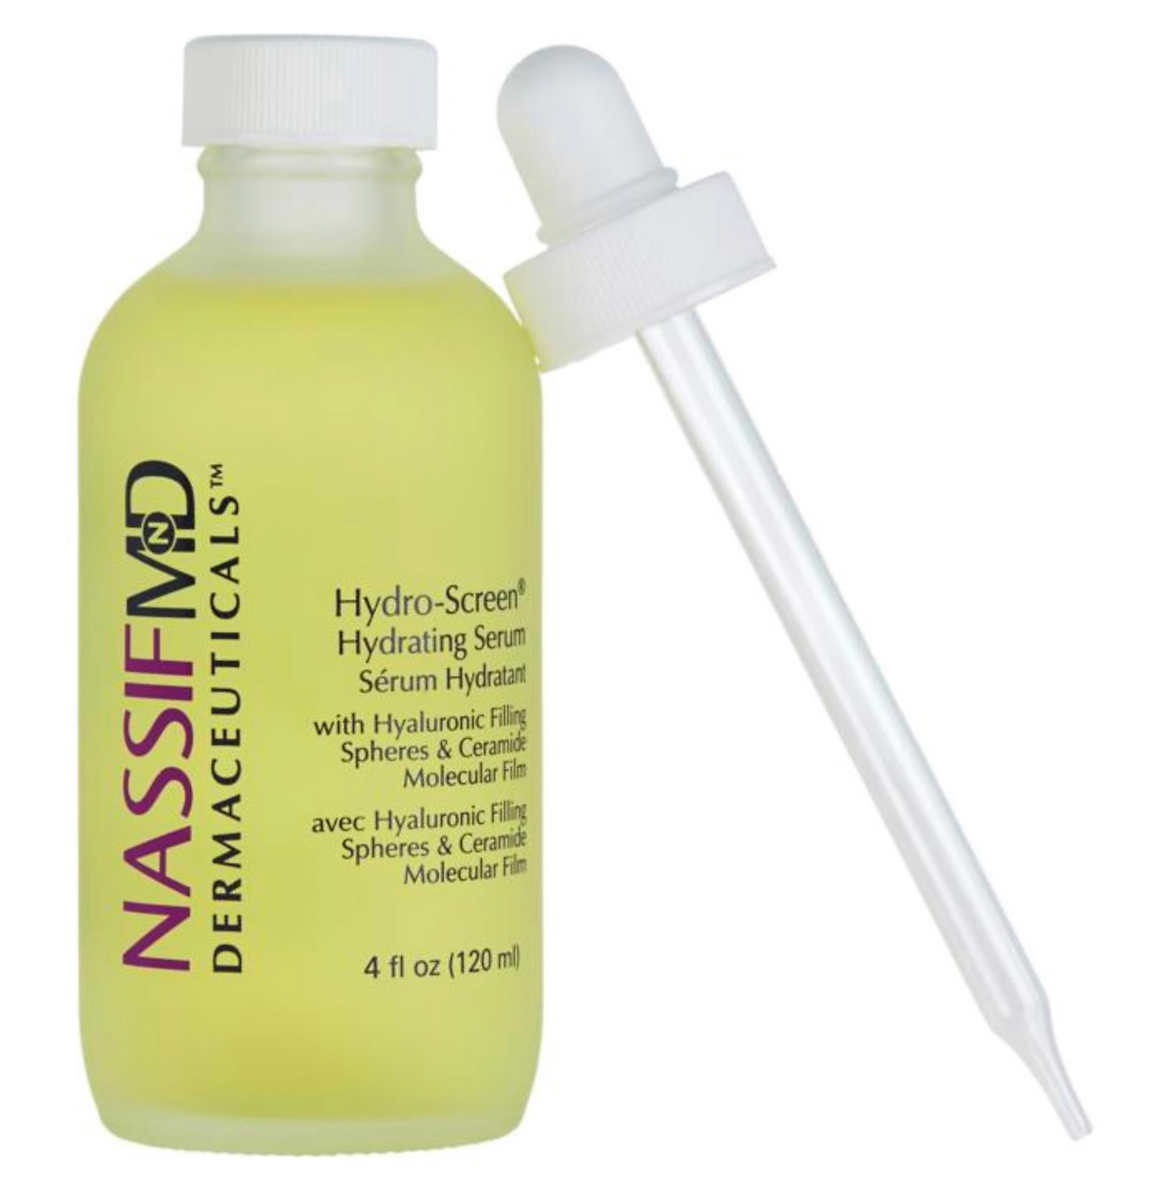 Nassifmd Dermaceuticals Hydro Screen Hydrating Serum Ingredients Explained